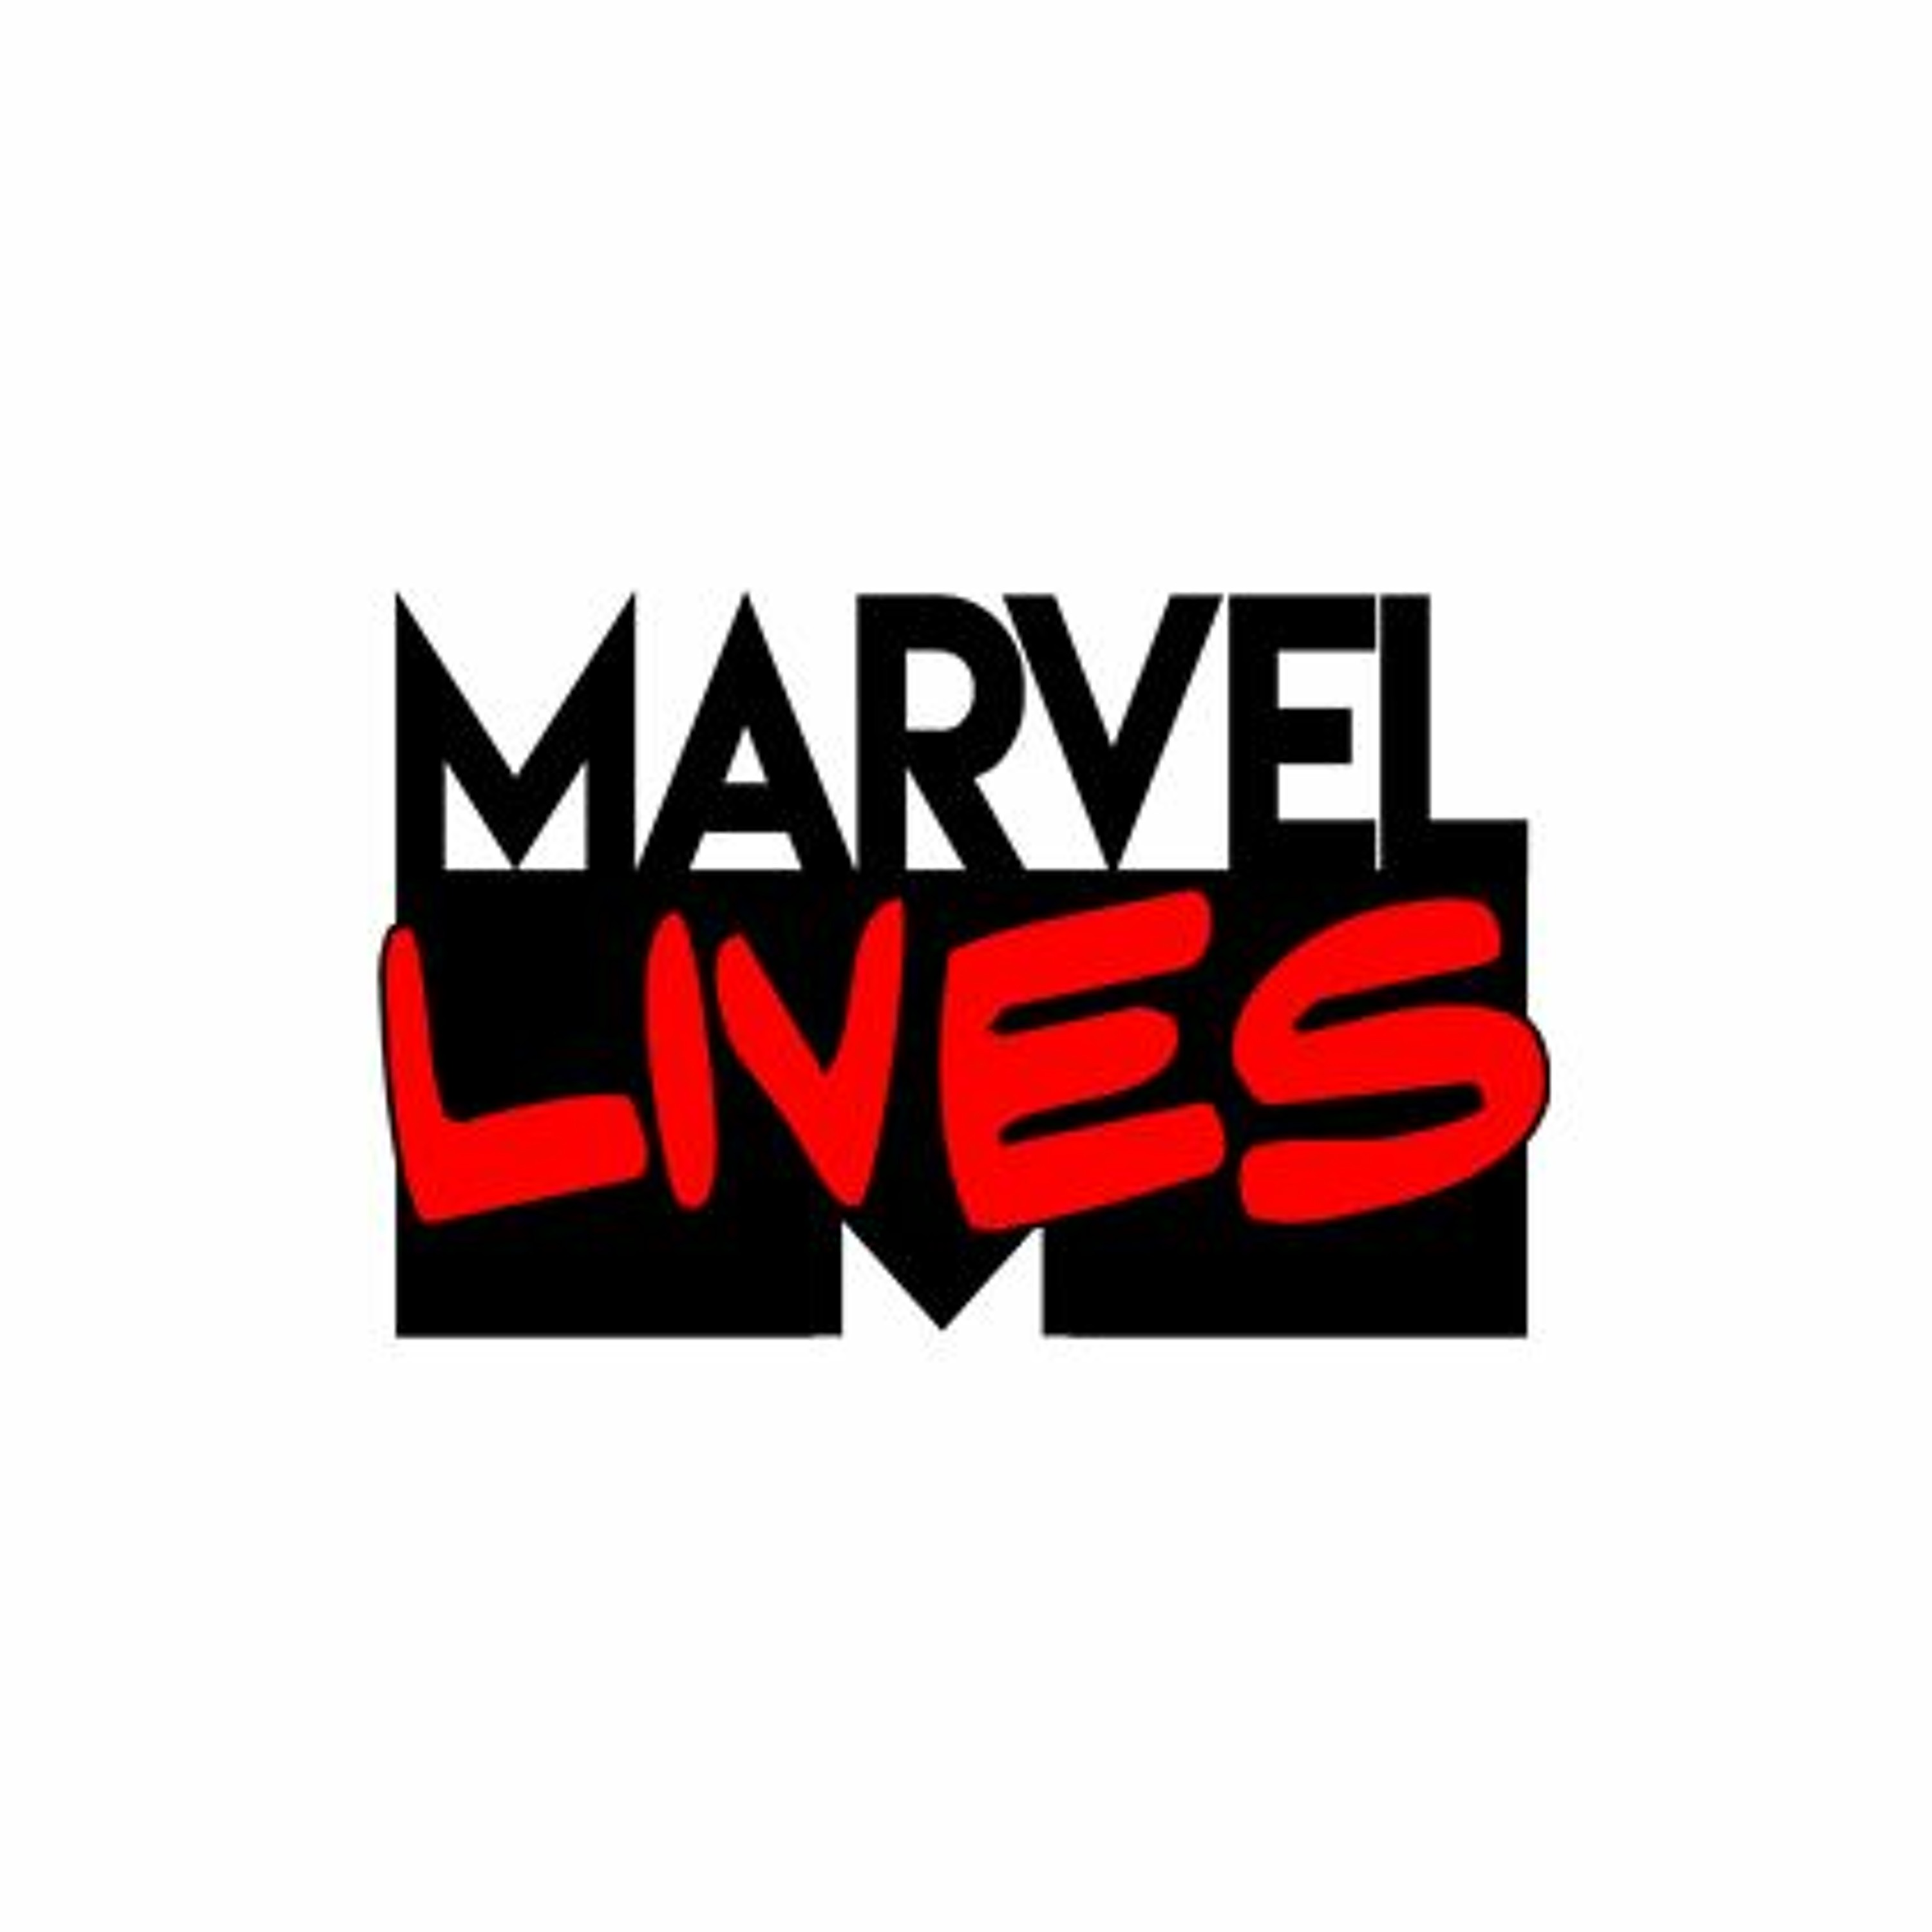 Marvel Lives #13 - The Regatta and CJA Makes His Presence Known Again!